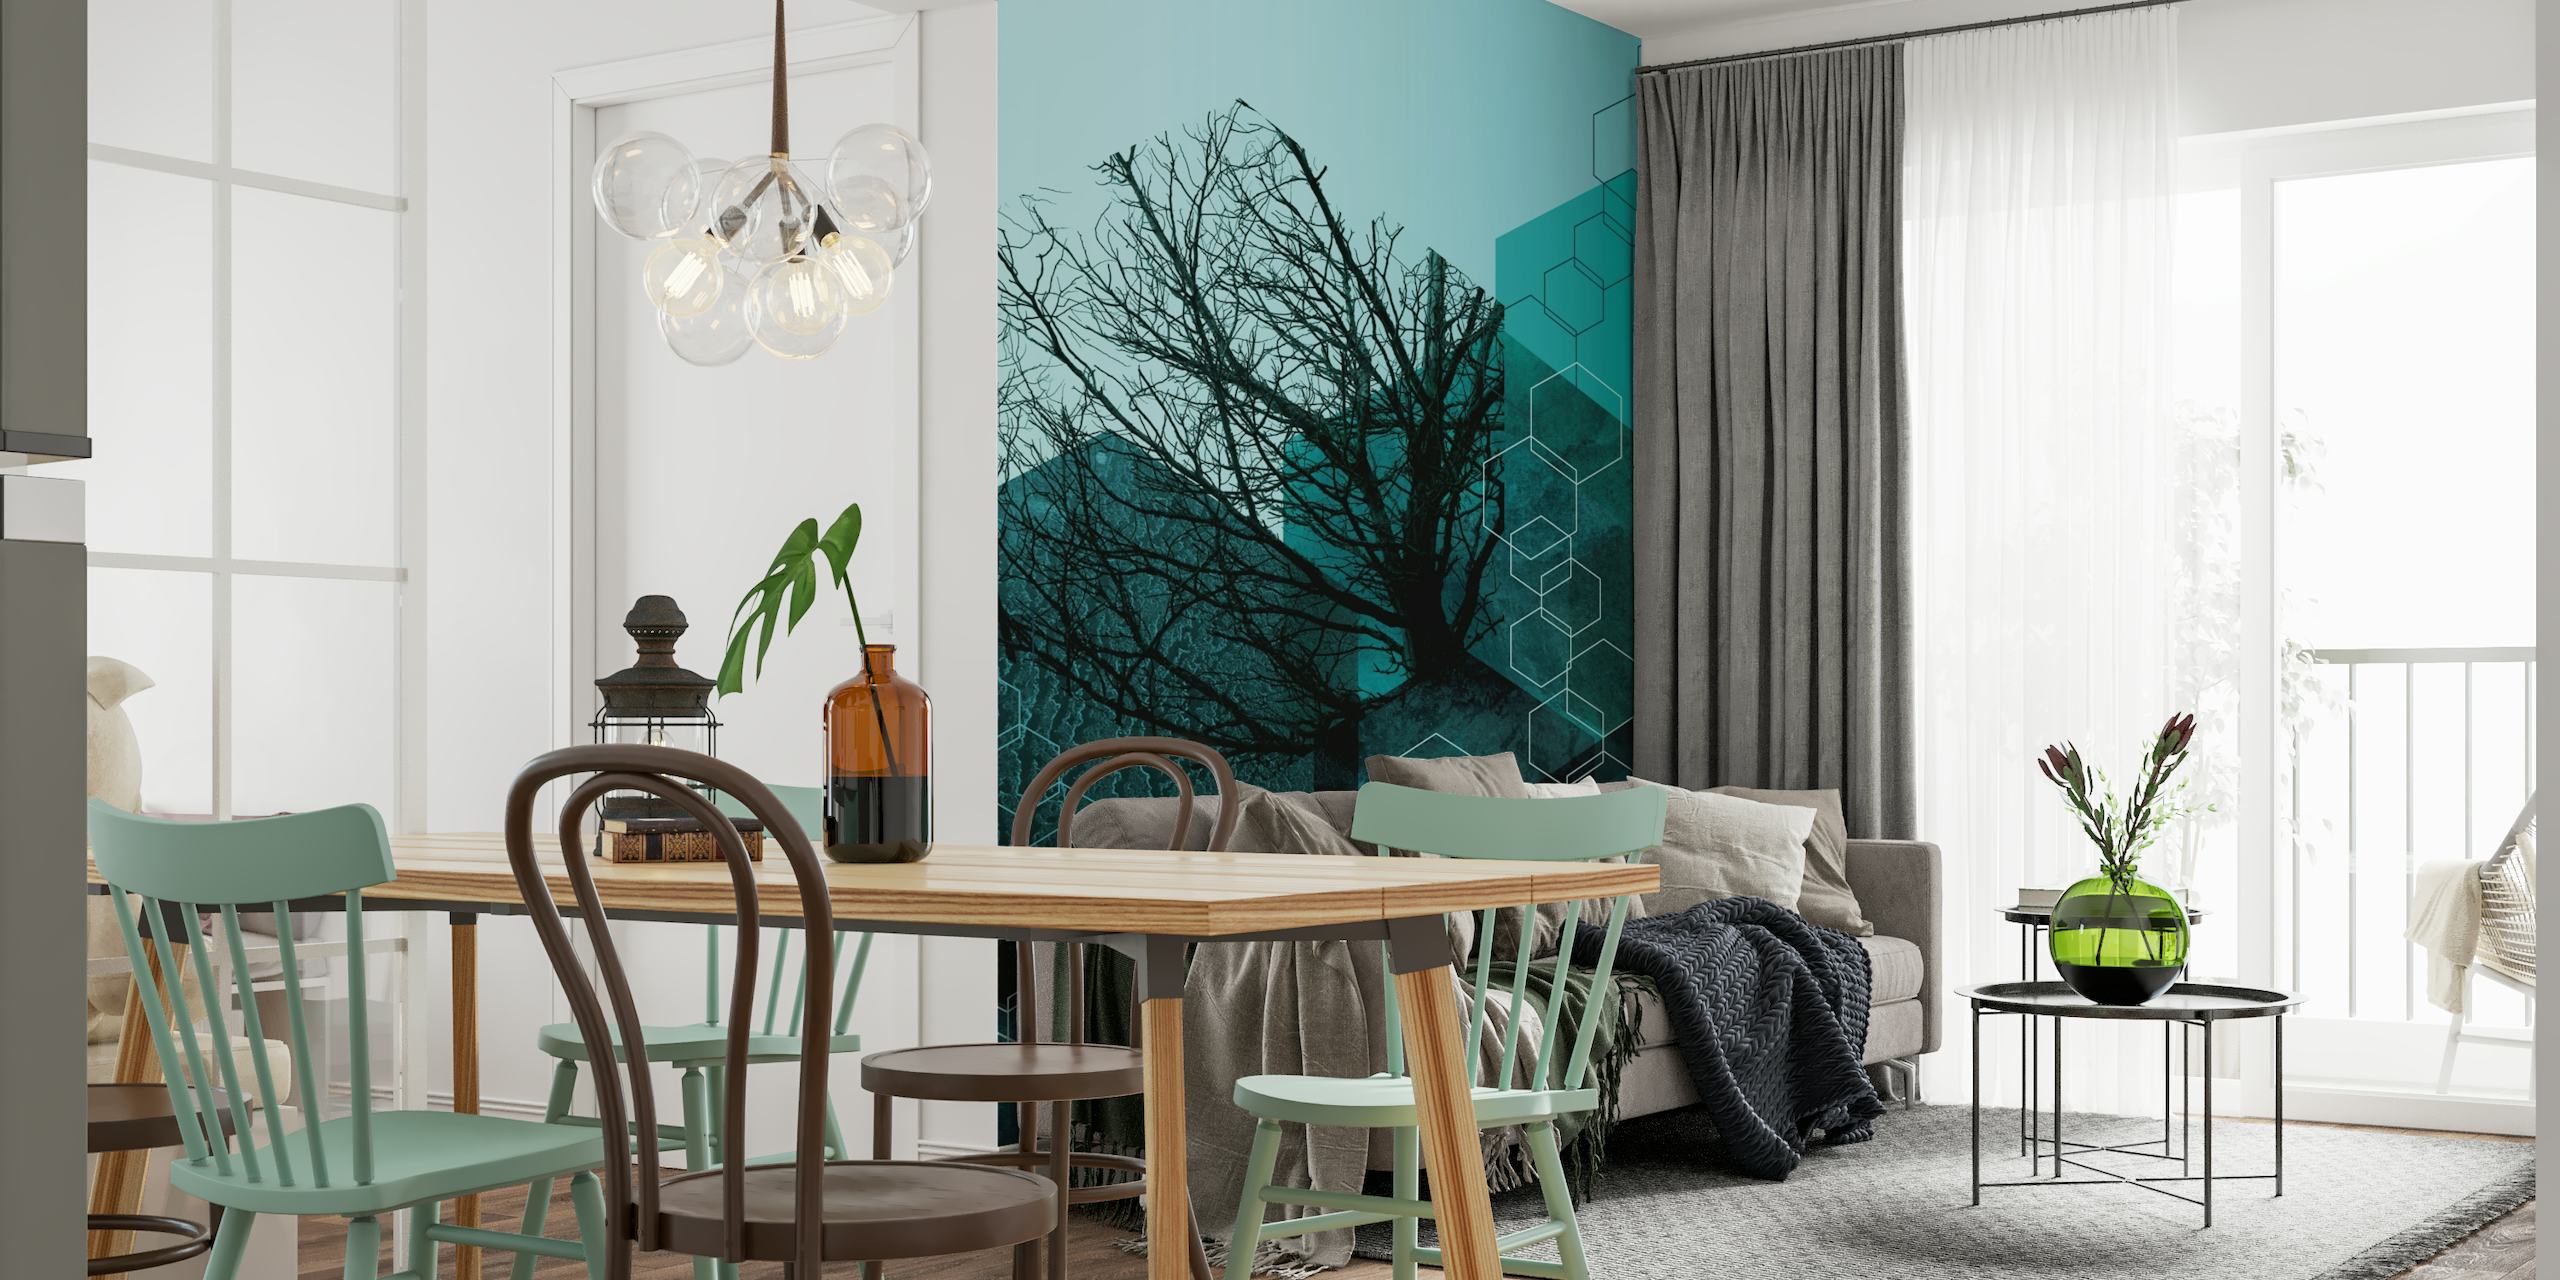 Abstract teal wall mural with a leafless tree and geometric shapes overlay from happywall.com